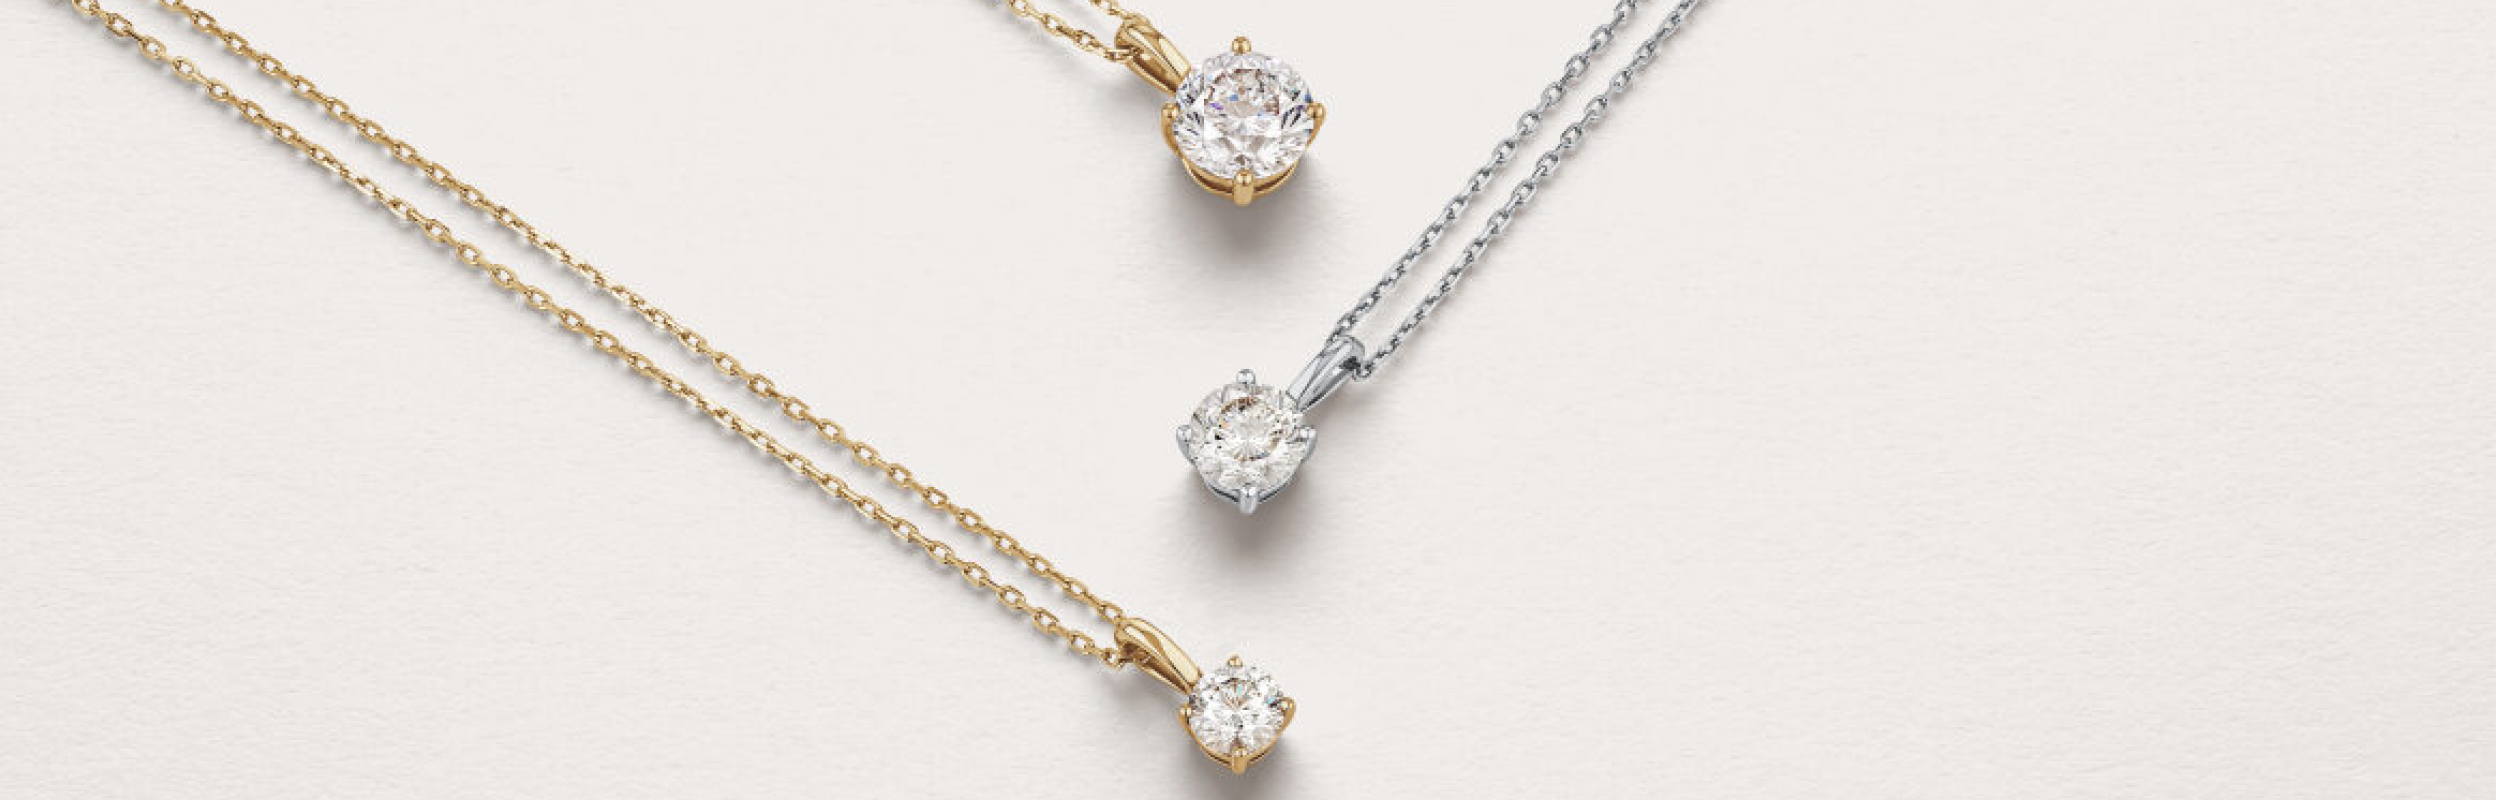 signature diamond solitaire pendants in yellow and white gold